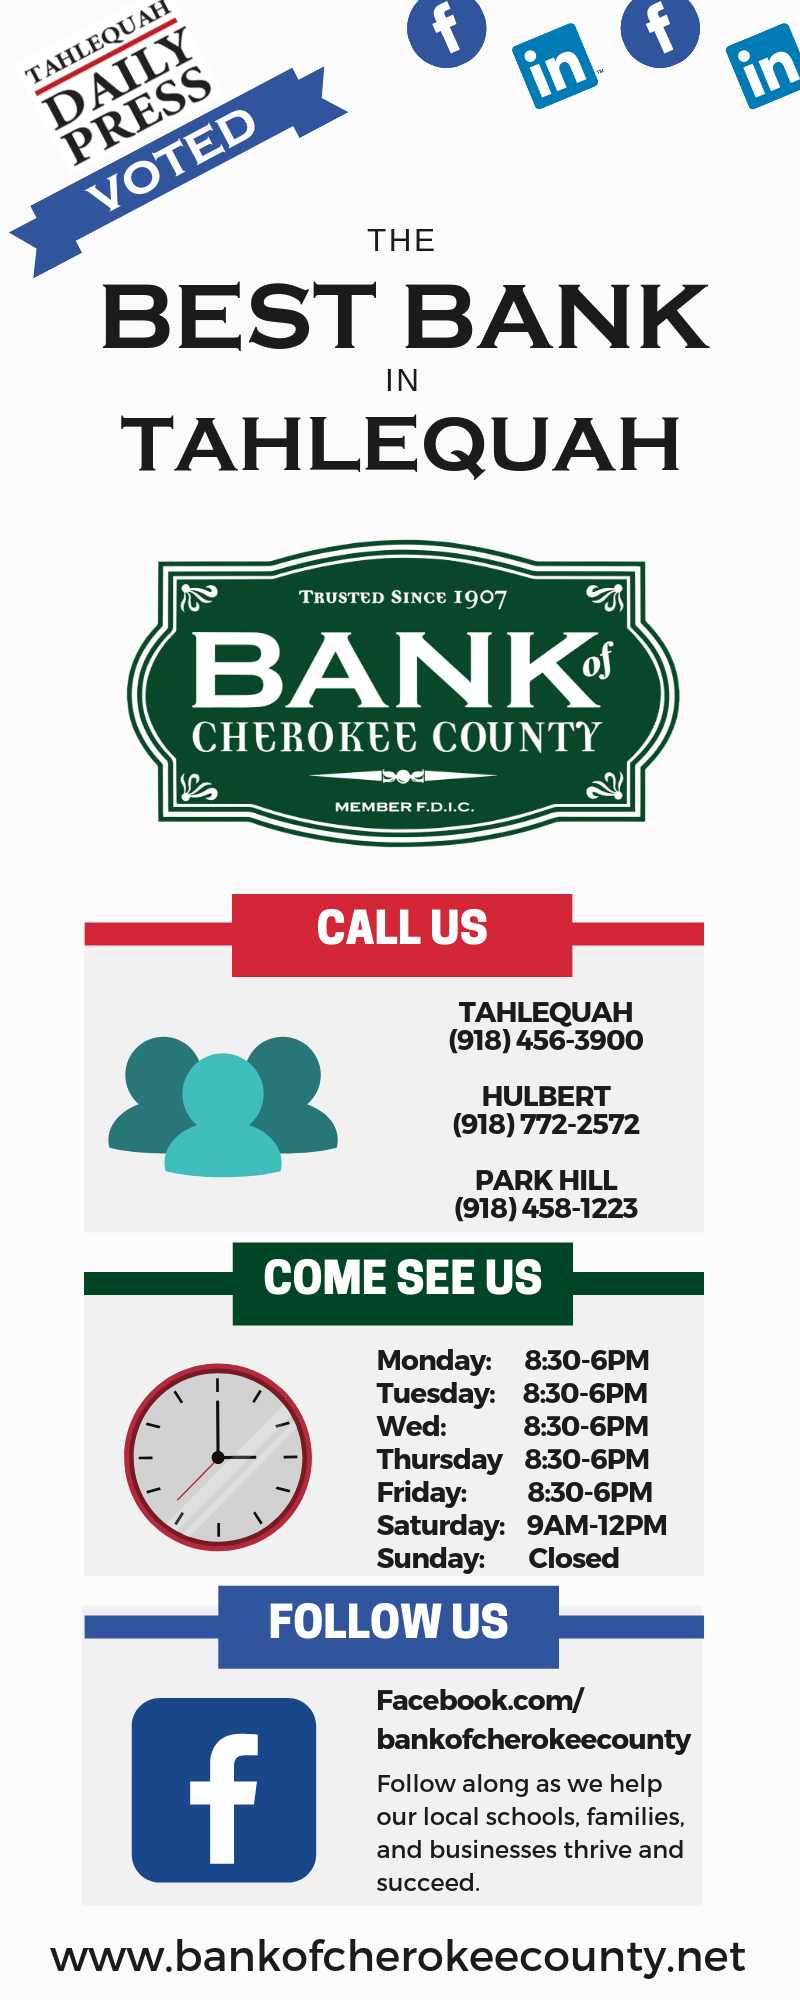 Best Banks in Tahlequah Infographic. Bank Of Cherokee County recently voted the best bank in Tahlequah by the Tahlequah Daily Press.